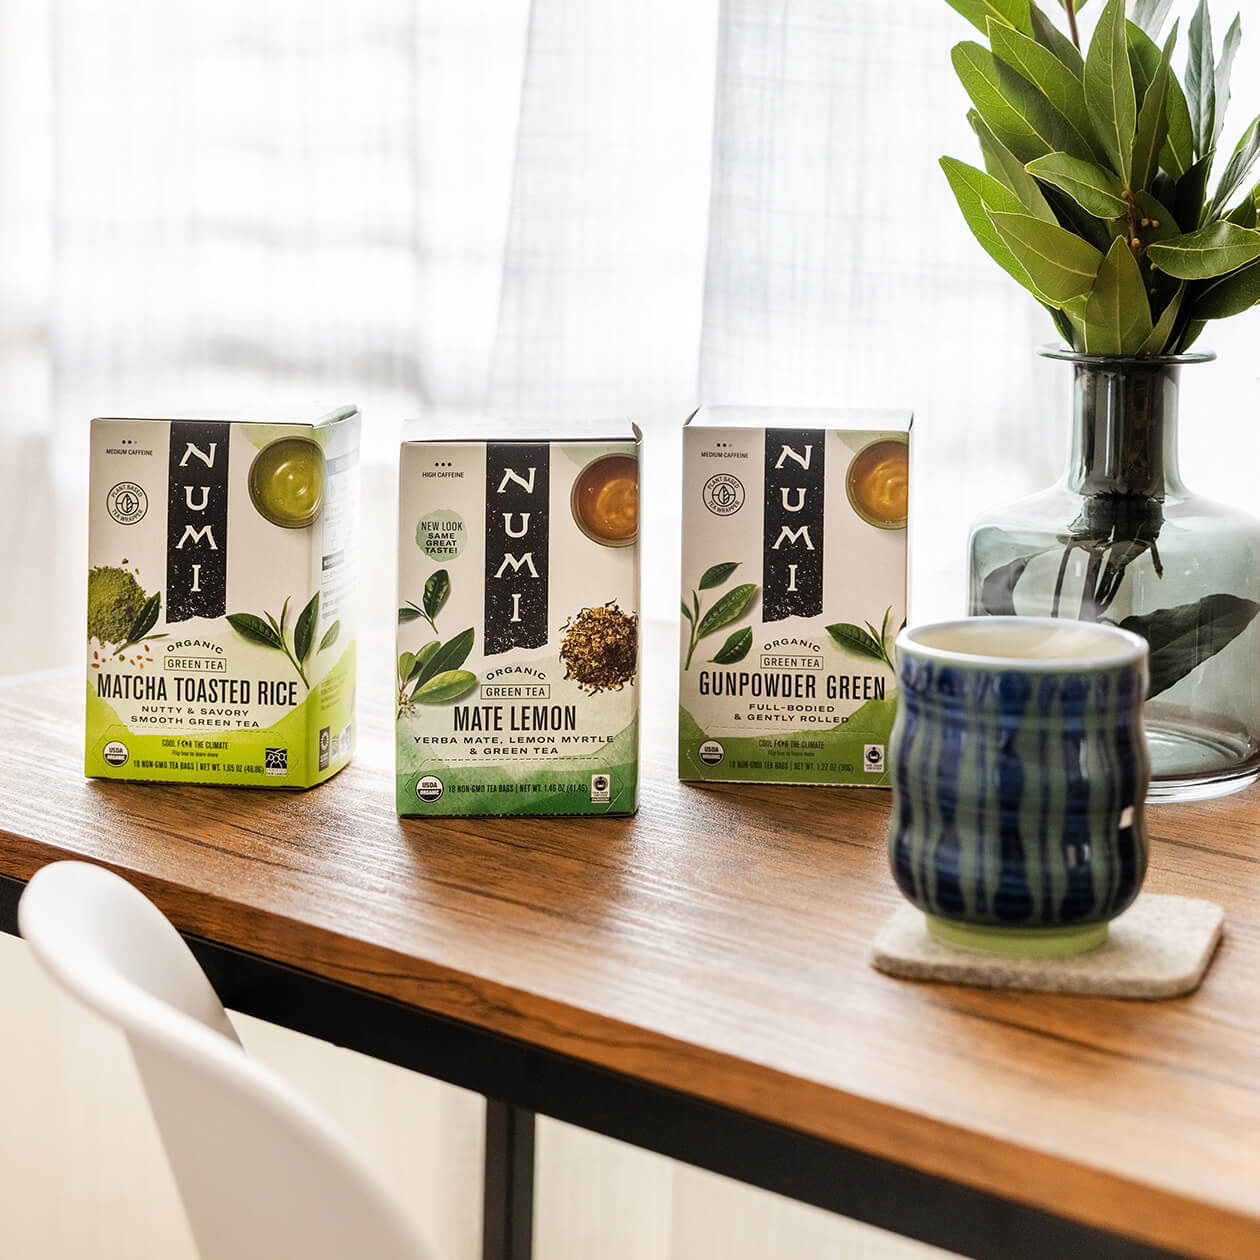 A trio of Numi green tea boxes on a desk with a brewed hot cup of tea